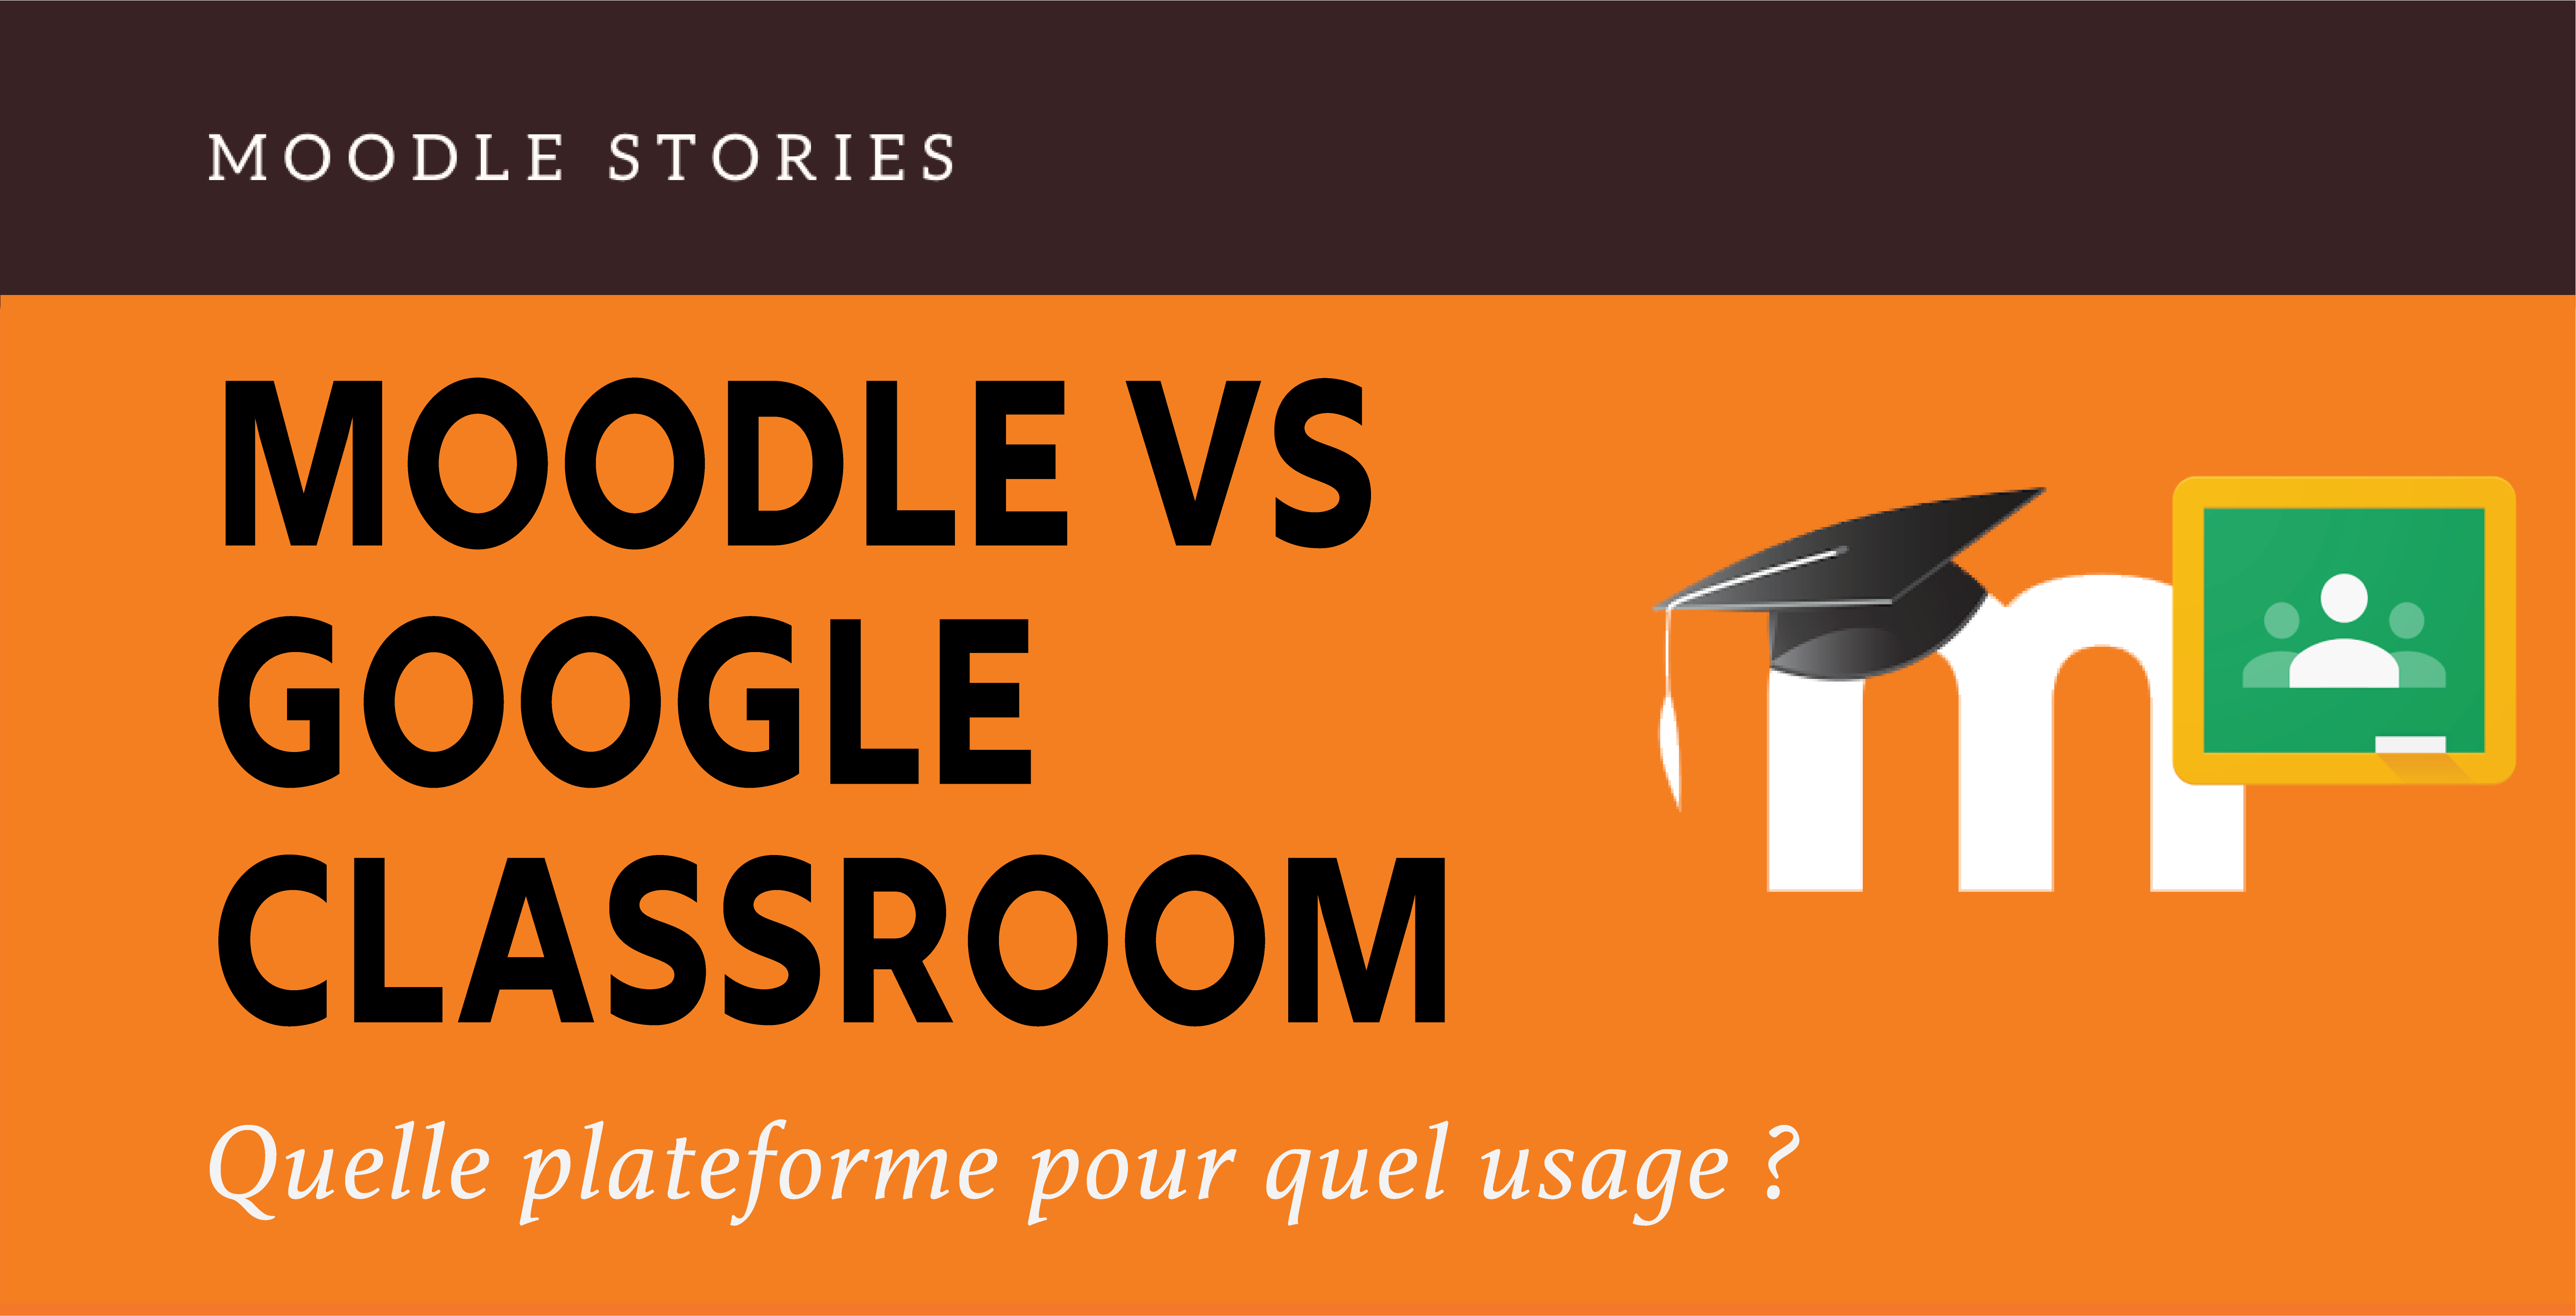 You are currently viewing Moodle Stories : Moodle vs Google Classroom [2023]